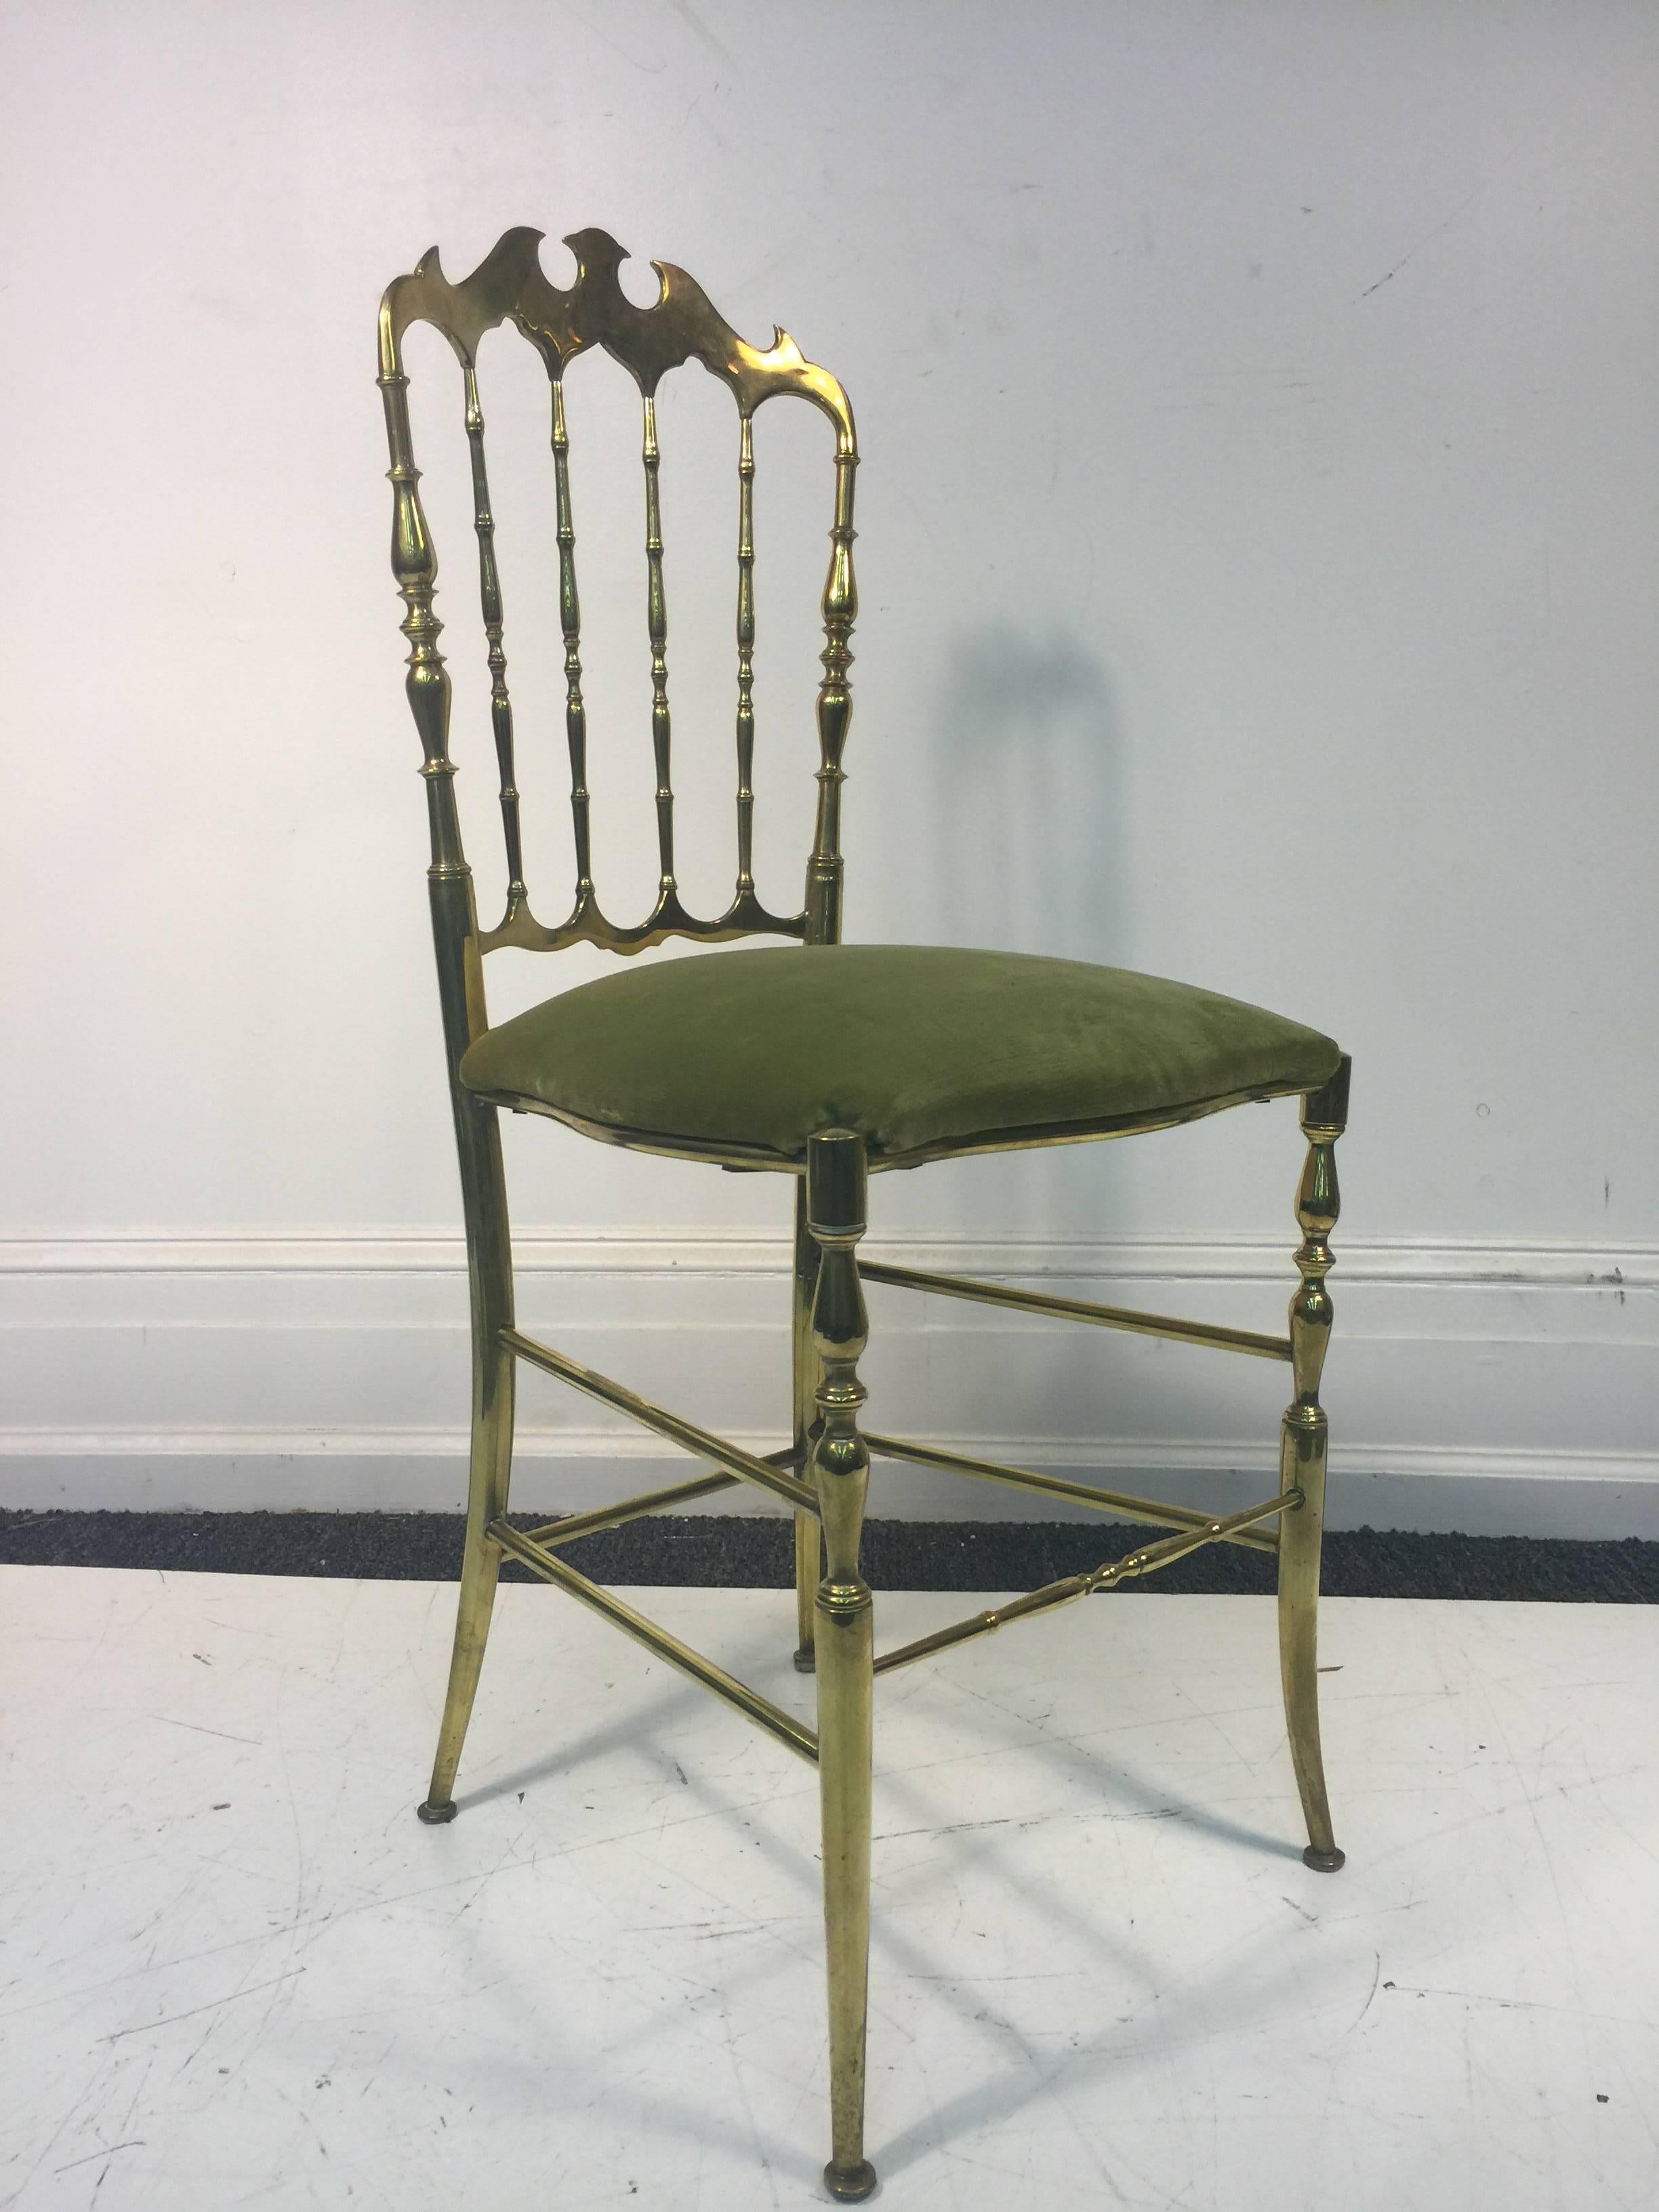 A beautiful, Italian, polished brass Chiavari style side chair with green velvet upholstery, circa 1960. apair with different fabric color